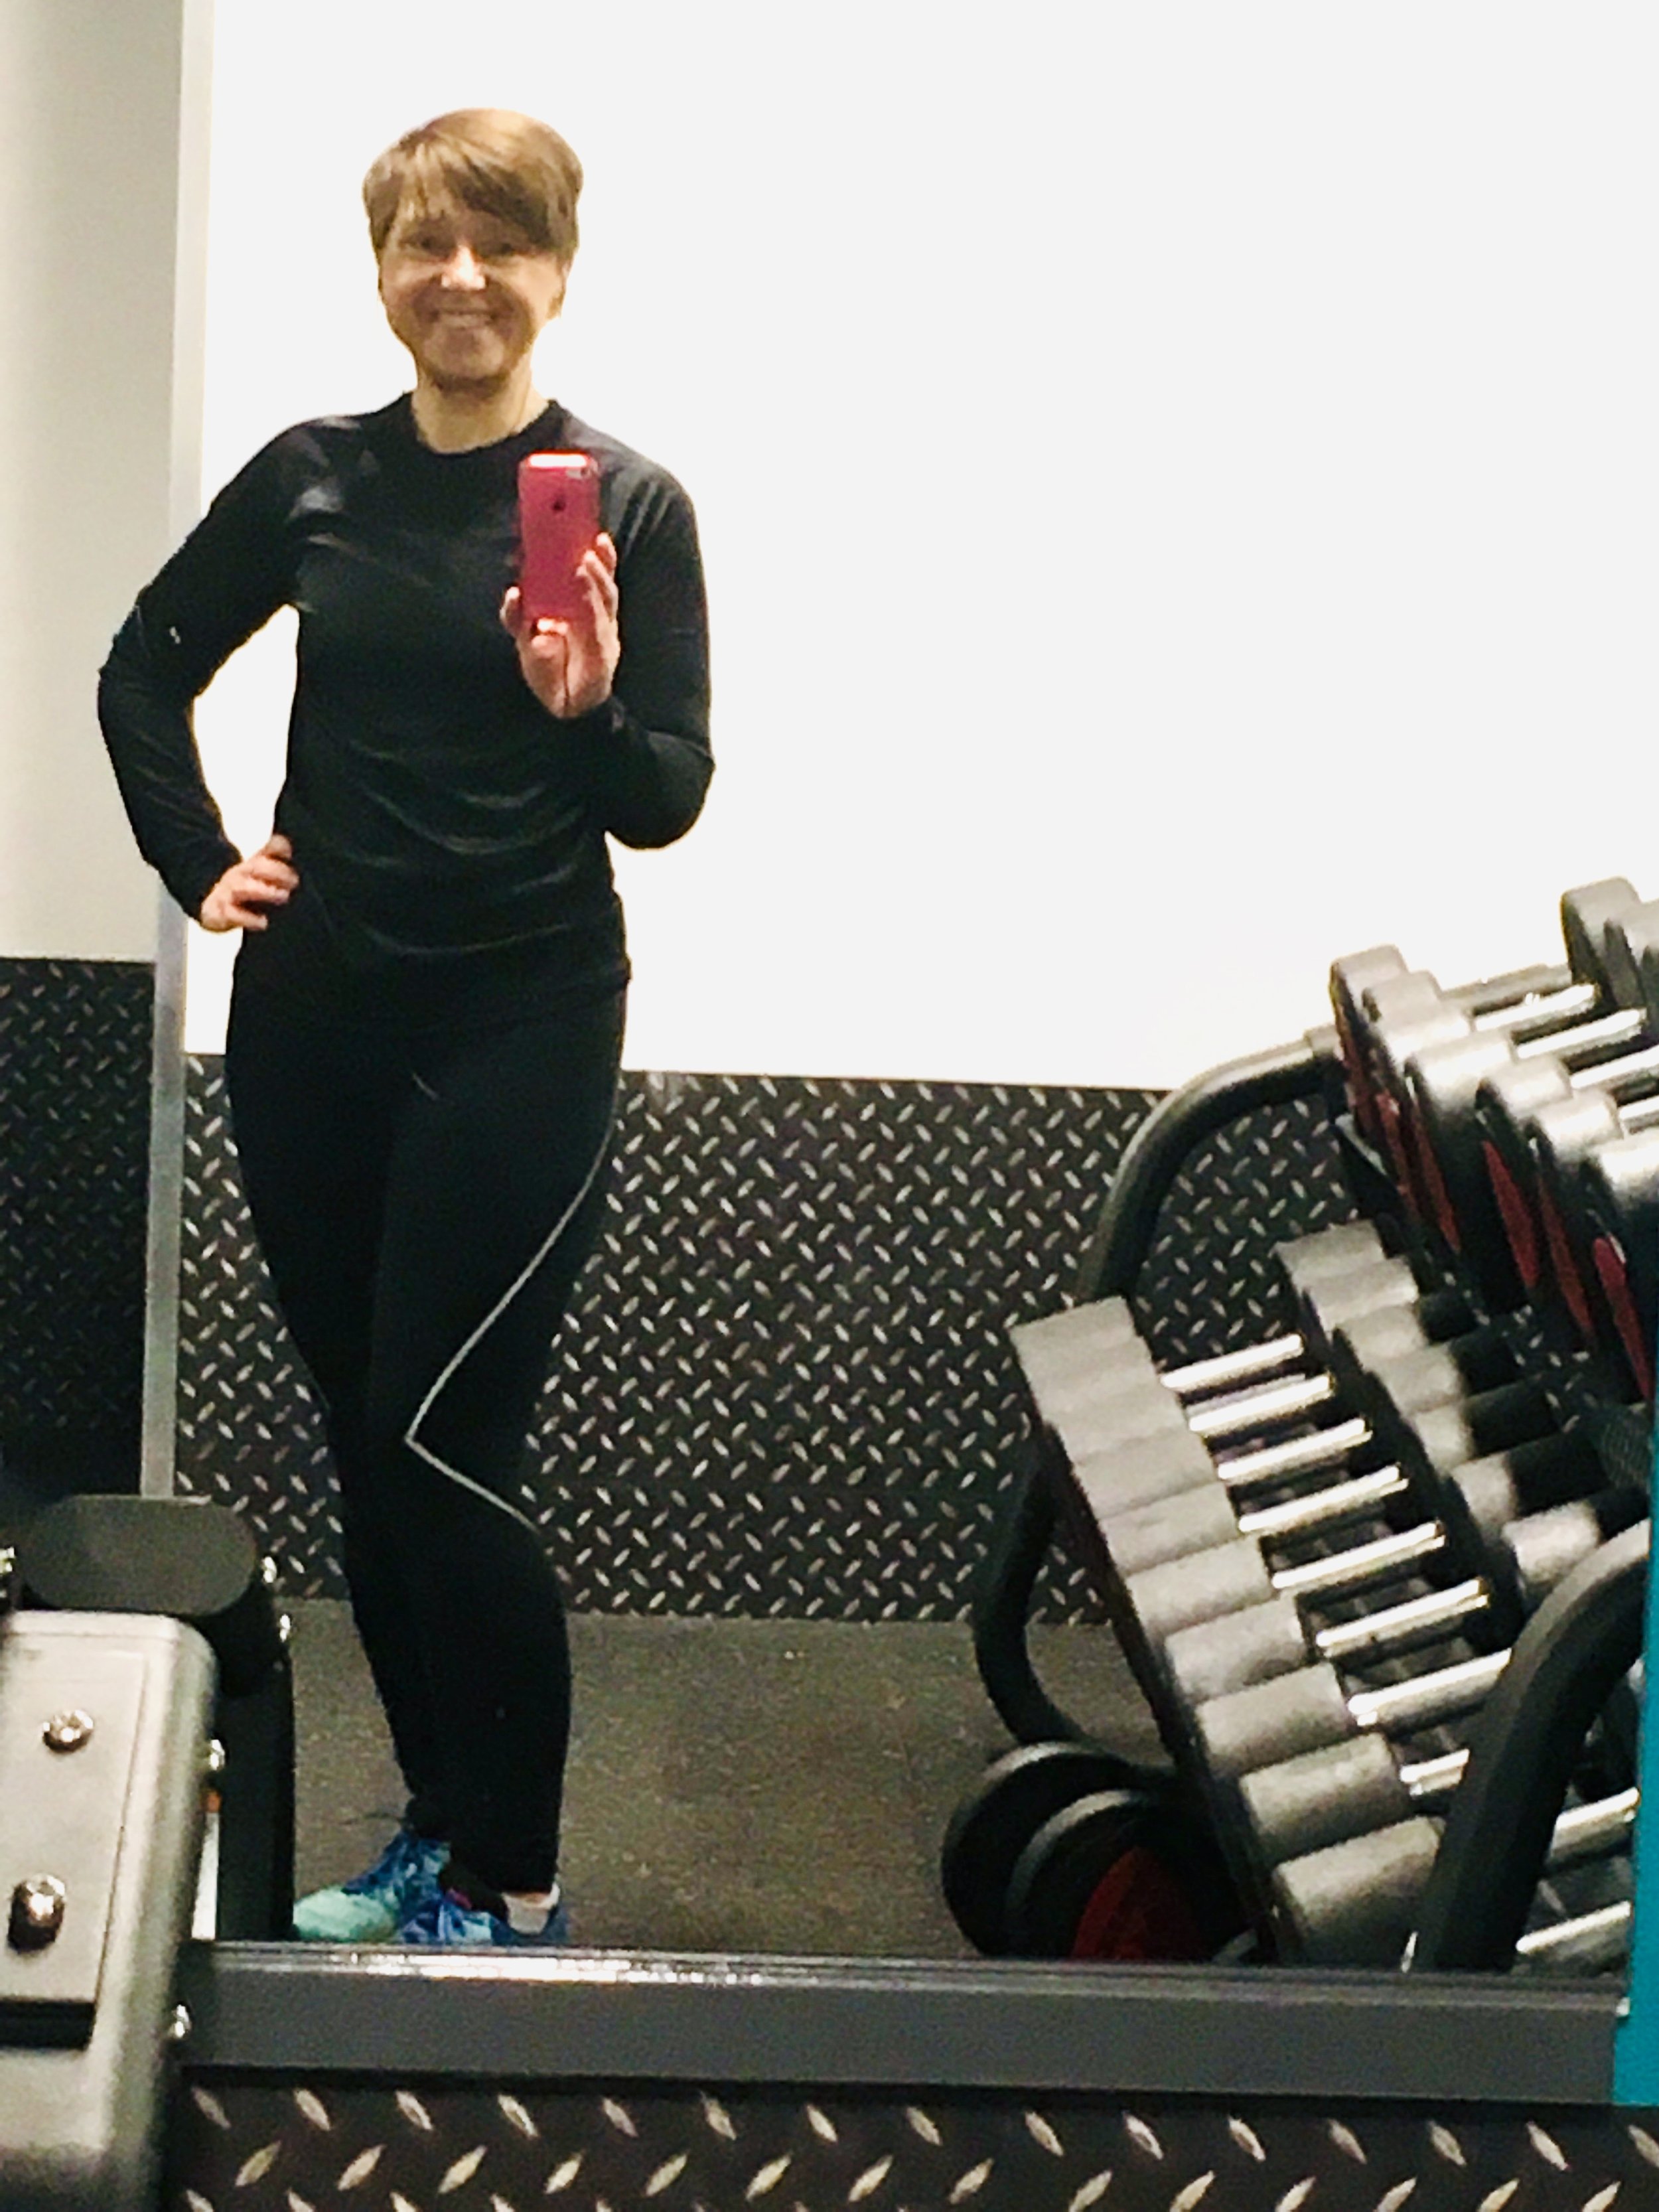   Me quickly capturing a picture of my Sundried leggings in the gym mirror before Mr 50Sense tells me to get on with lifitng weights!  